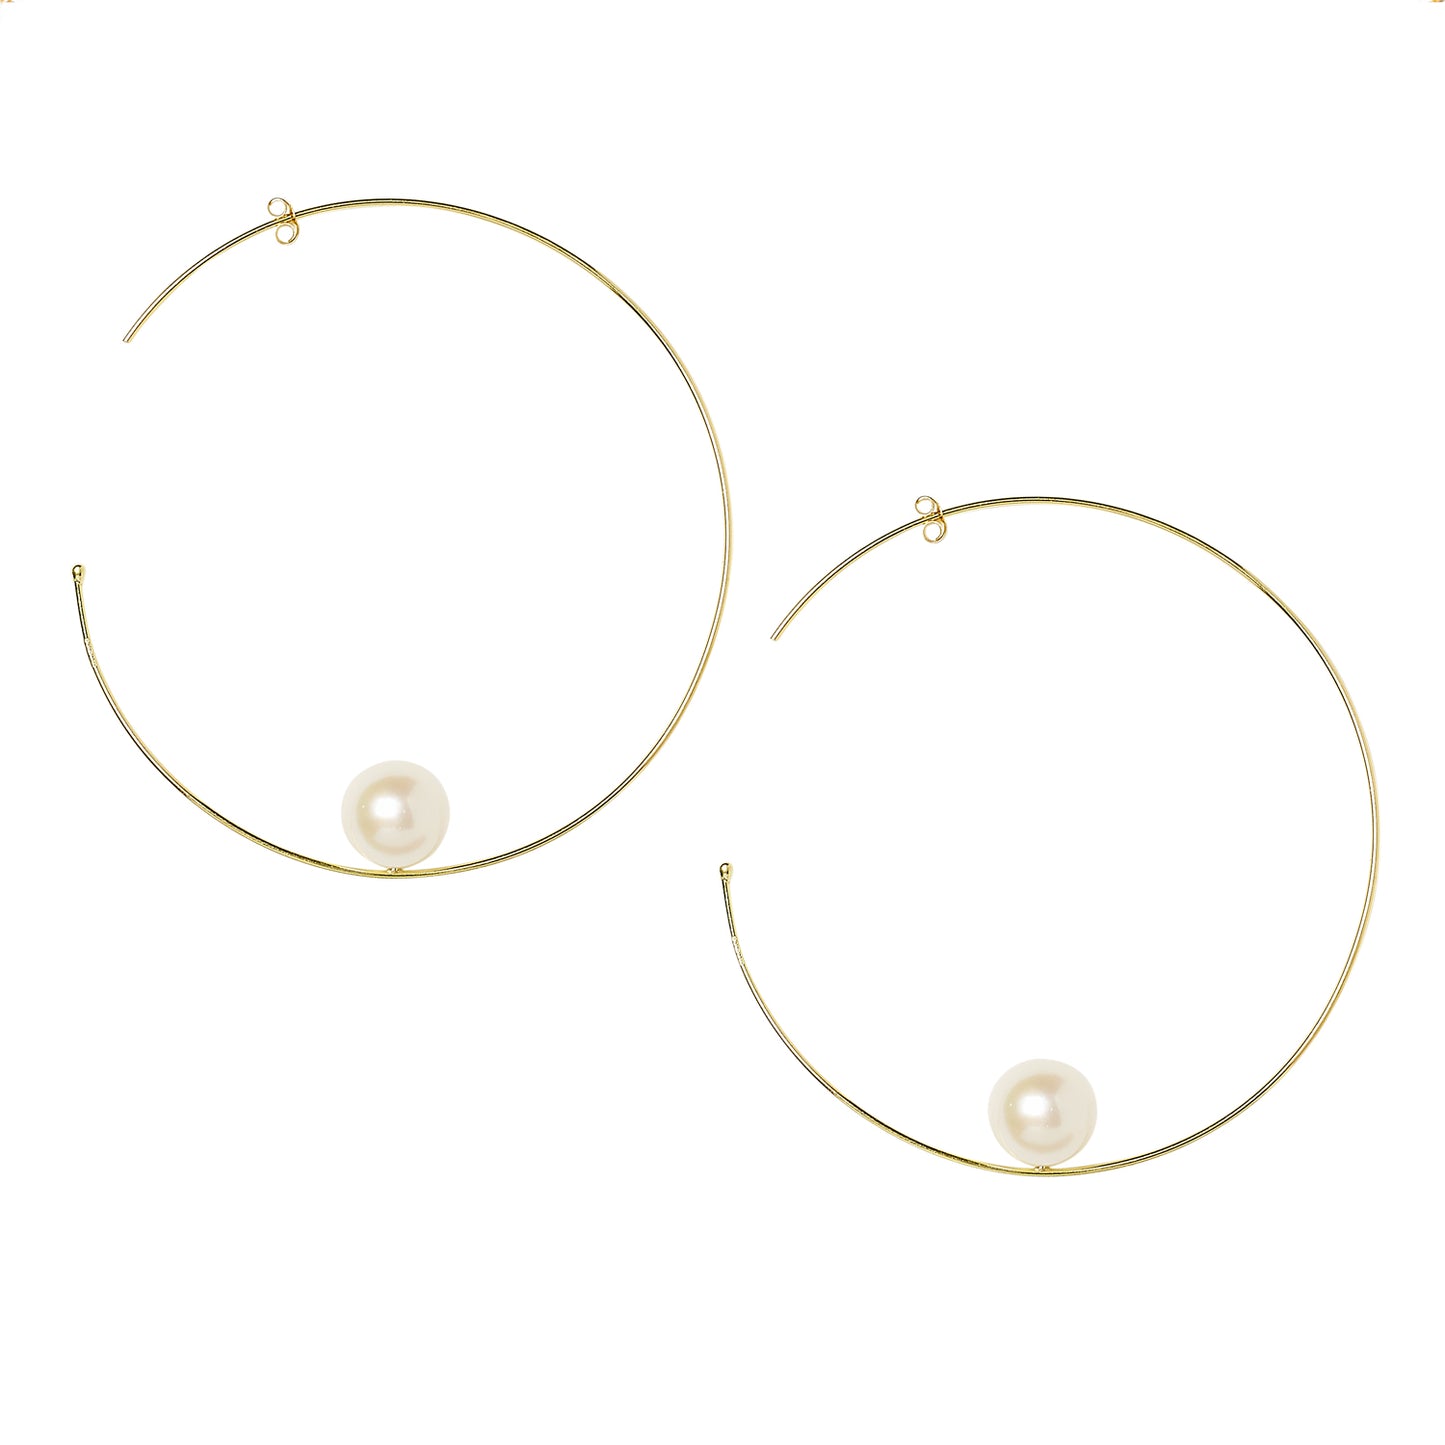 18ct yellow gold large fine hoops with floating white fresh water pearls